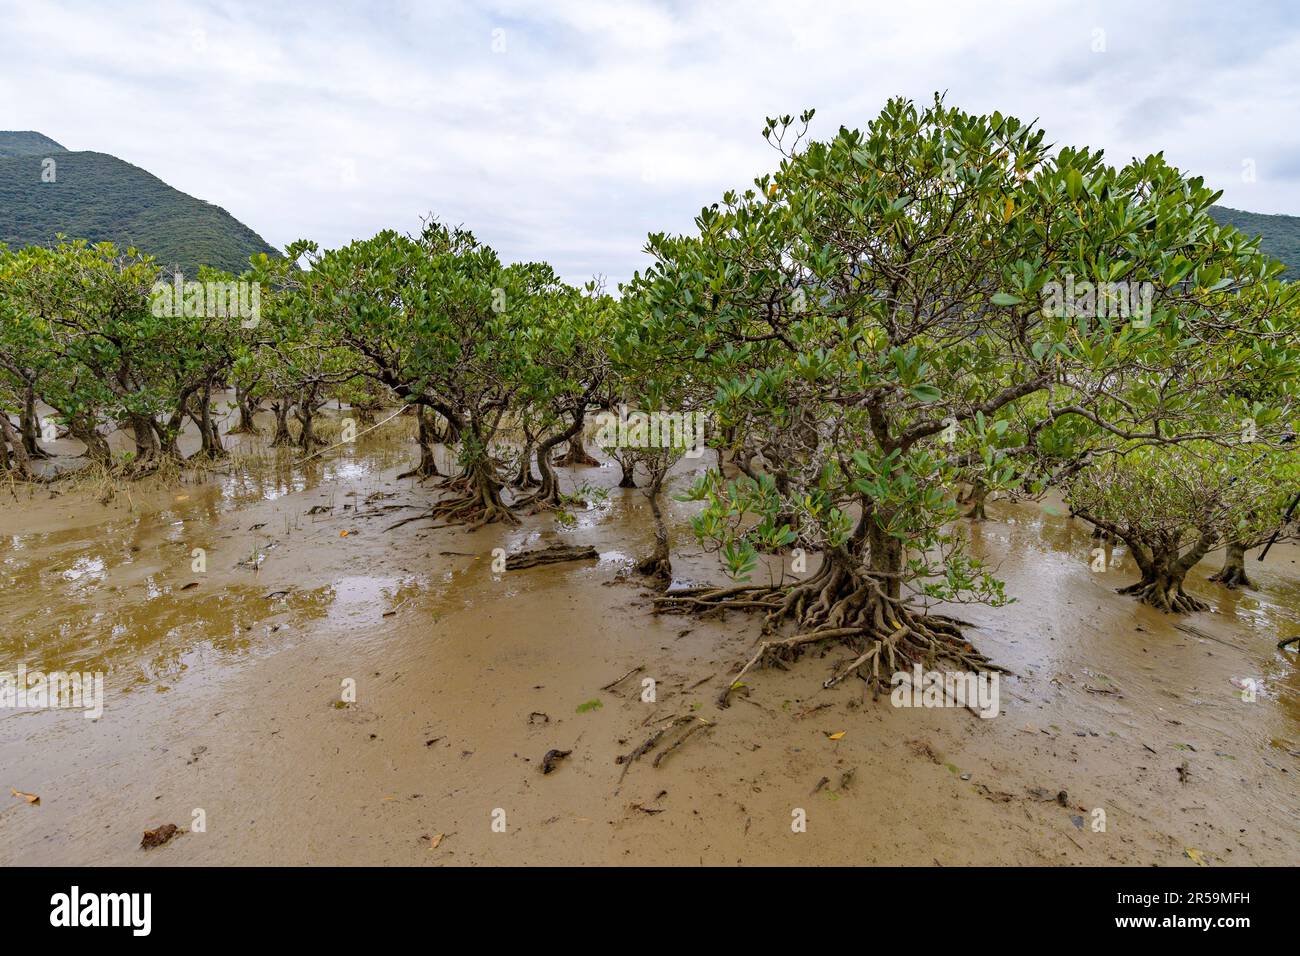 The mangrove species Kandelia obovata growing in mud and brackish water at Amami Mangrove Primeval Forest, Amami Oshima island, southern Japan. Stock Photo